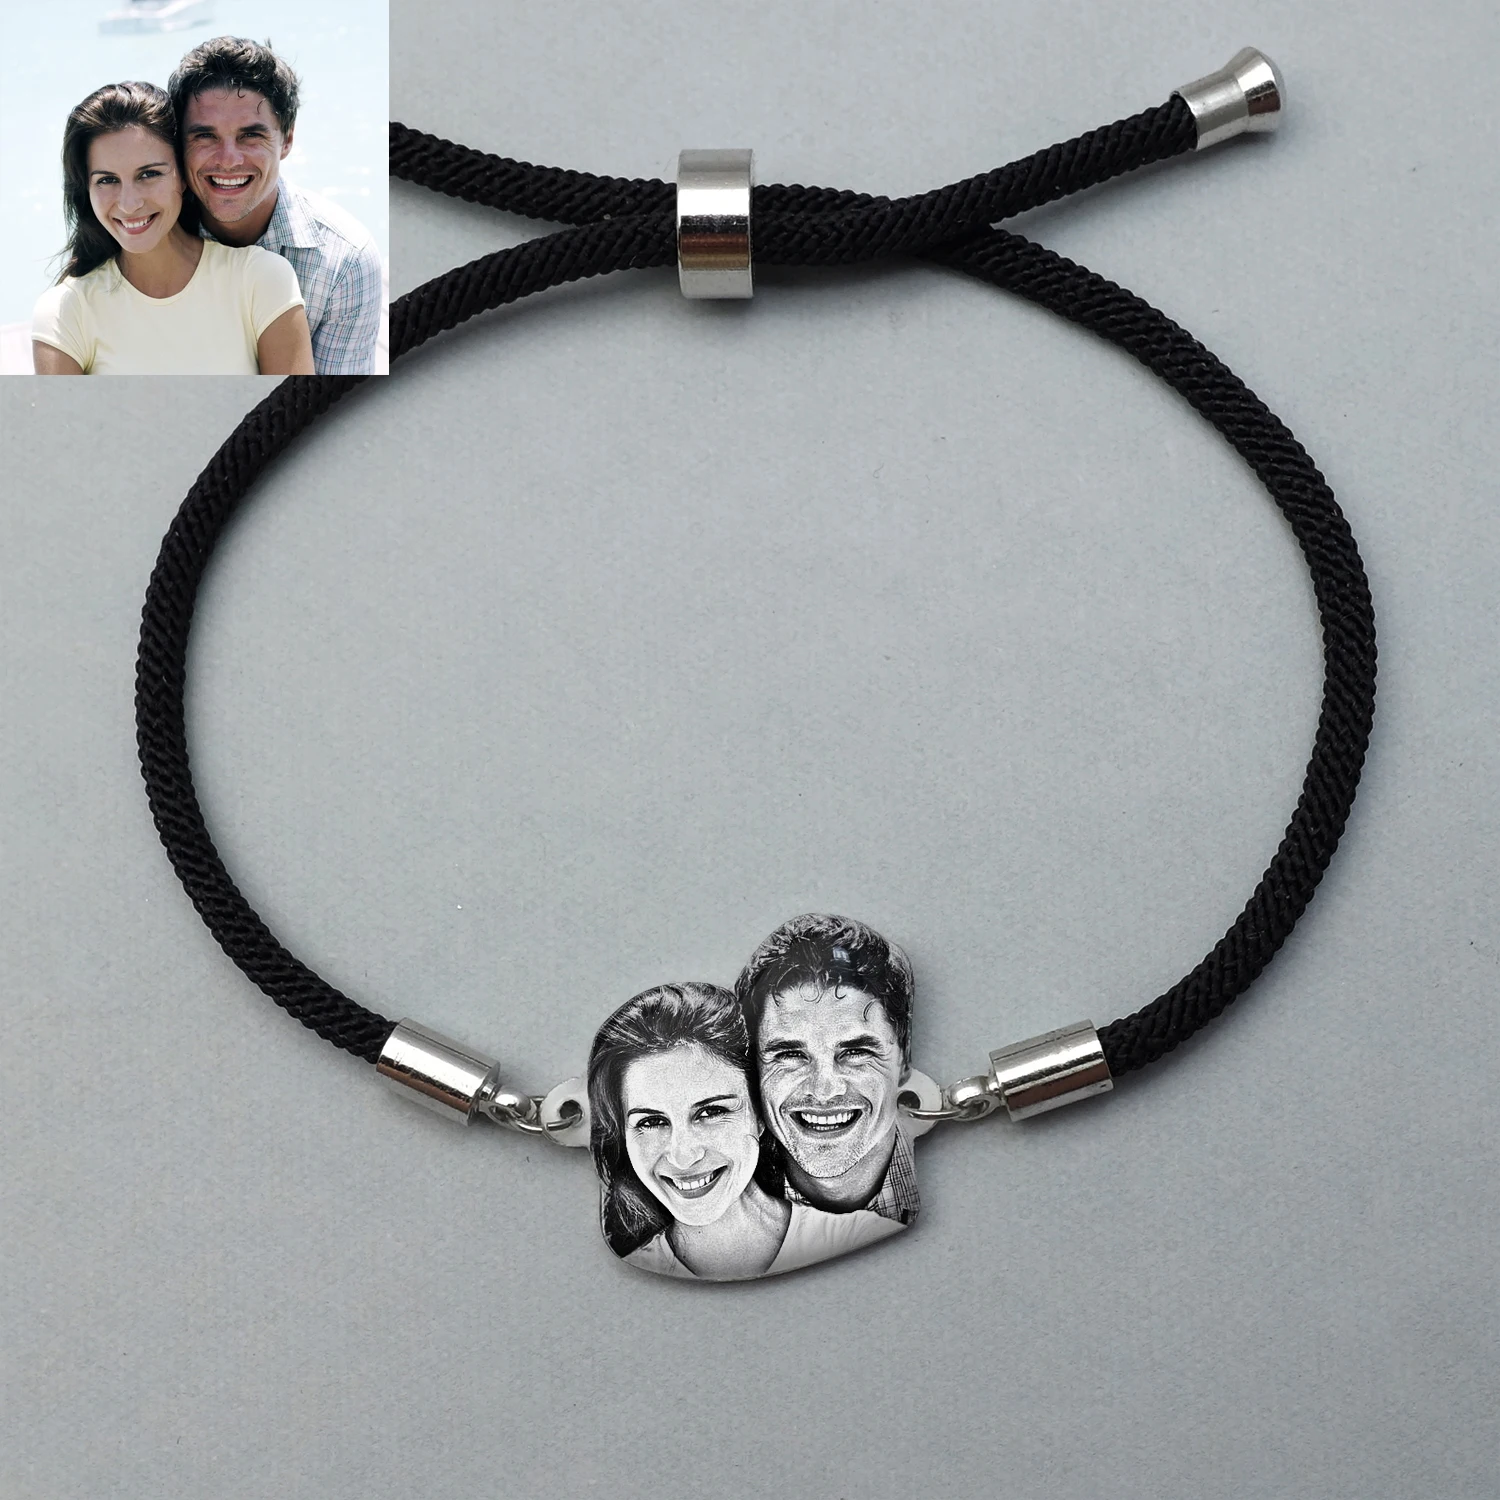 Custom Photo Charm Bracelet Personalized Picture Jewelry Couples Birthday Lover Family Memory Keepsake Christmas Gift for Her custom name bracelet personalized baby her his family name bracelet bridesmaid gift keepsake jewelry personalized gifts